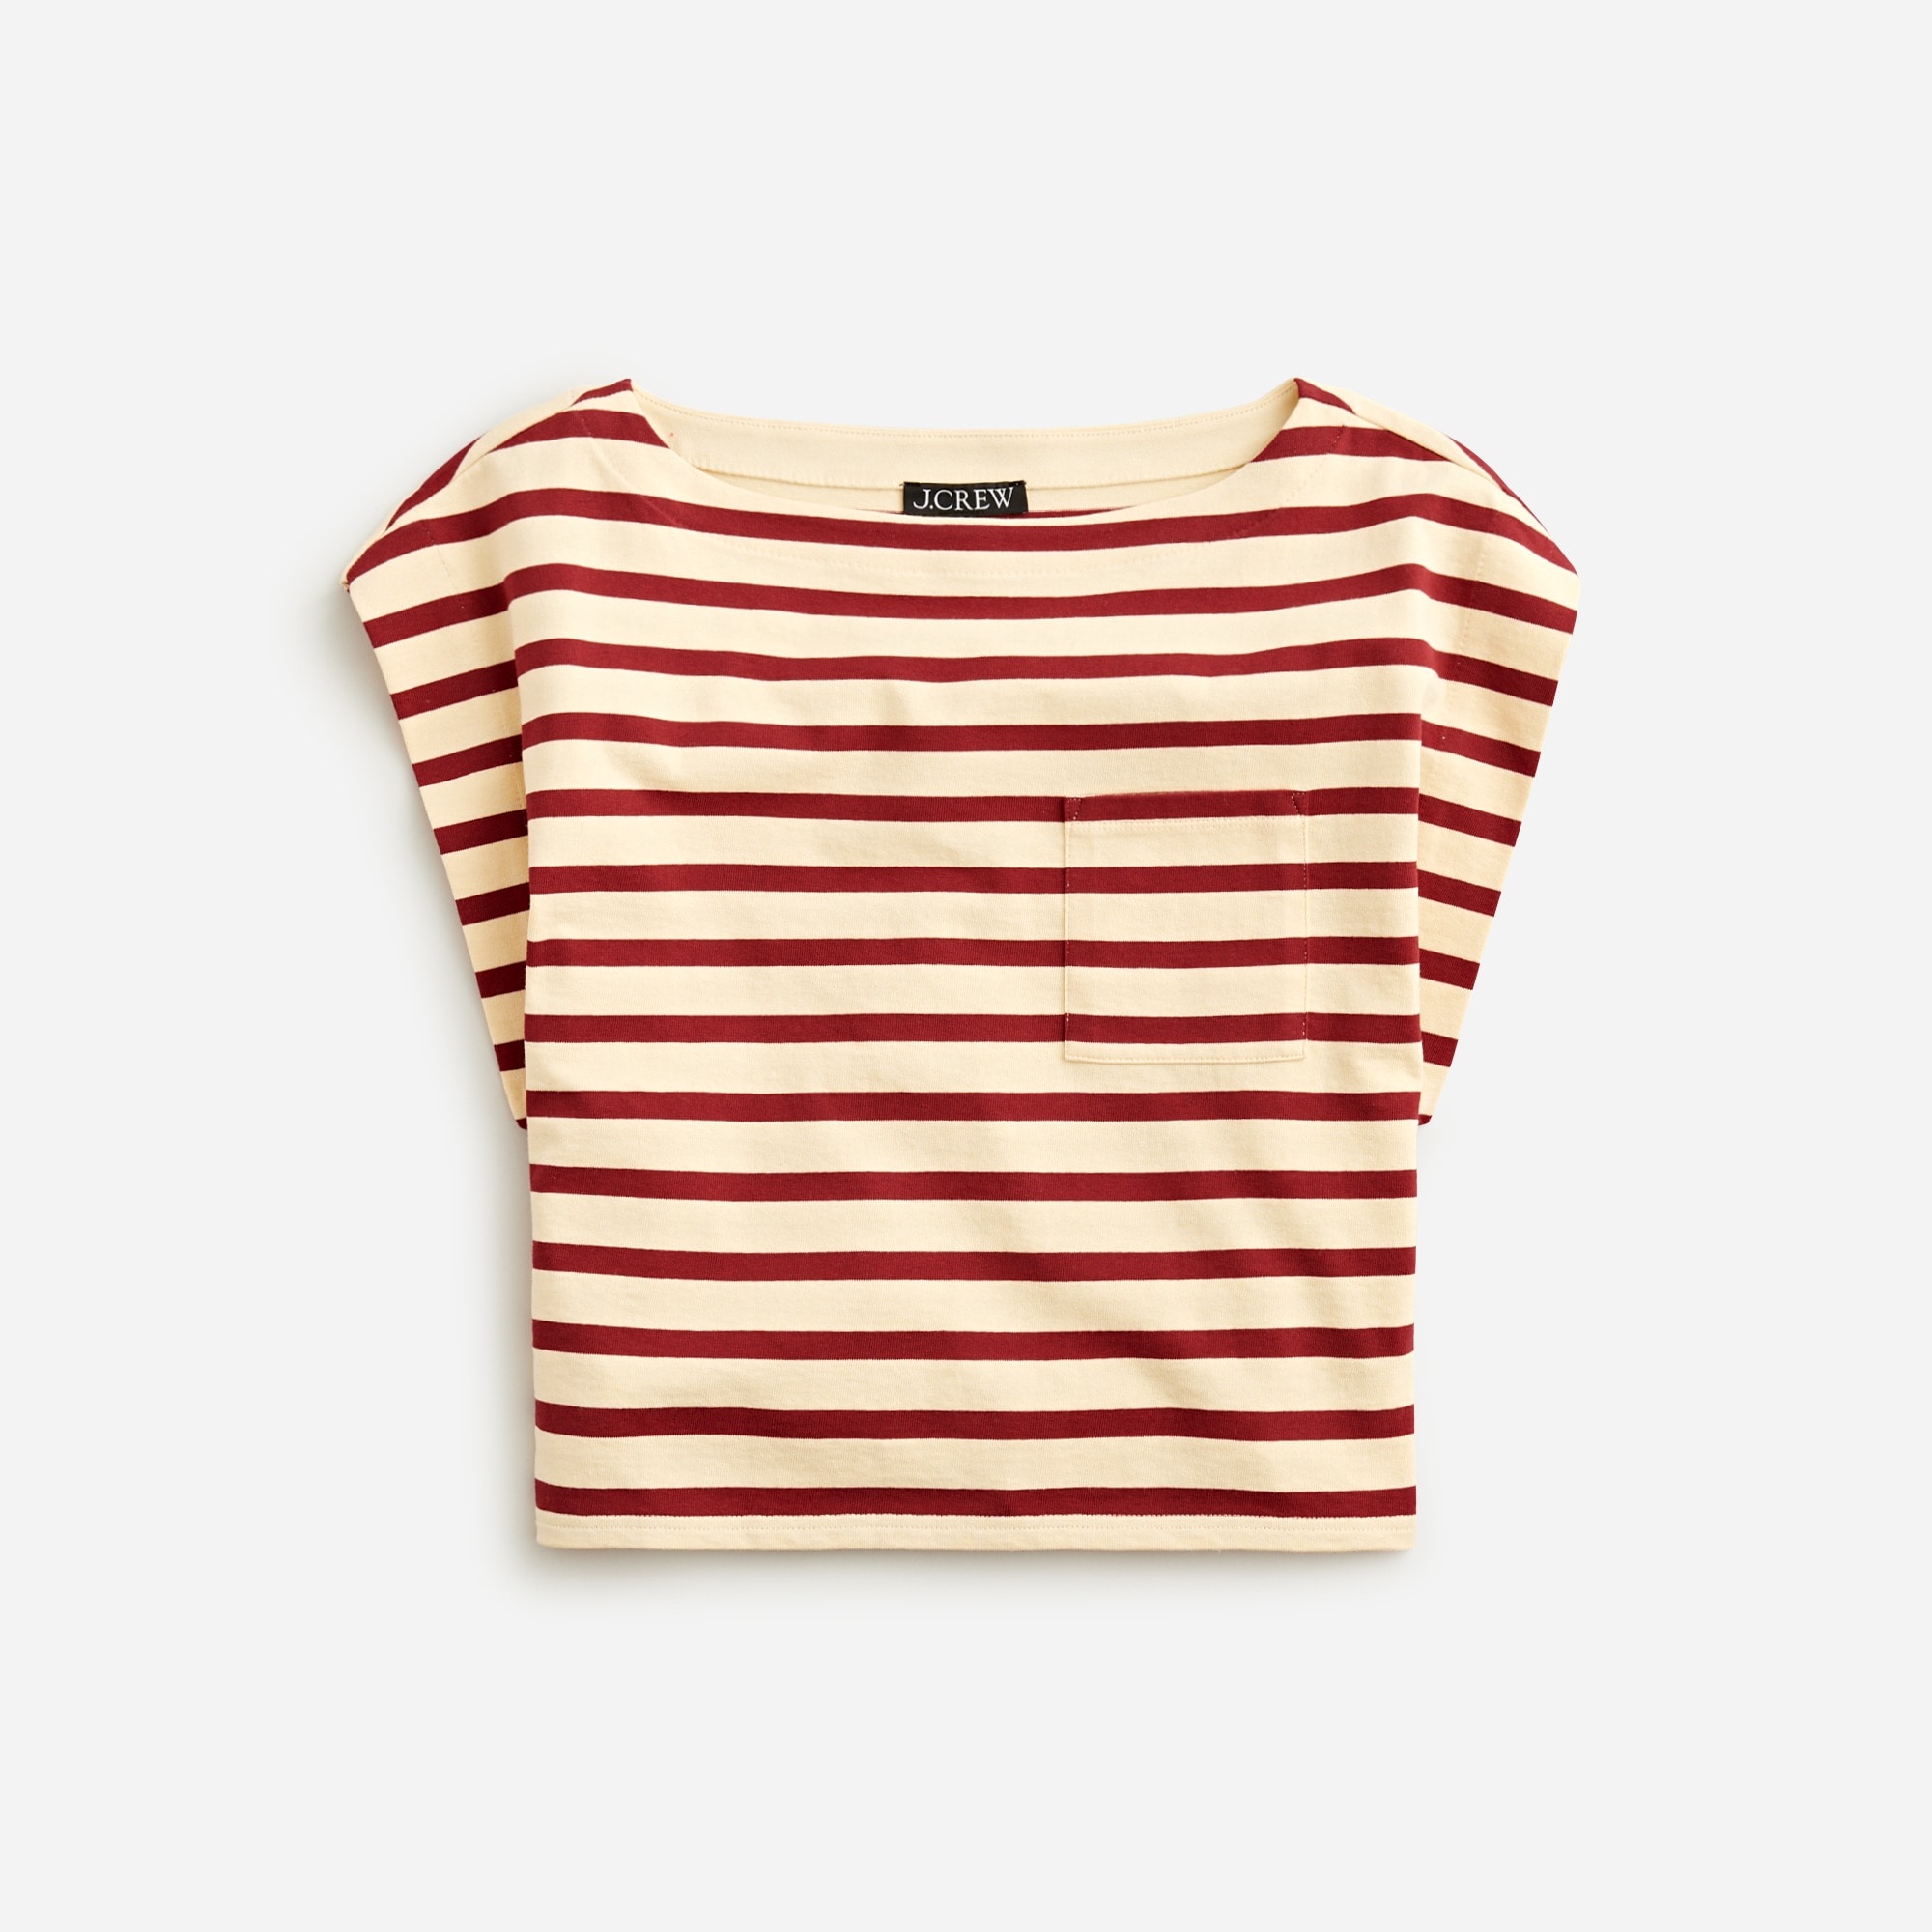  Boatneck muscle T-shirt in stripe mariner cotton